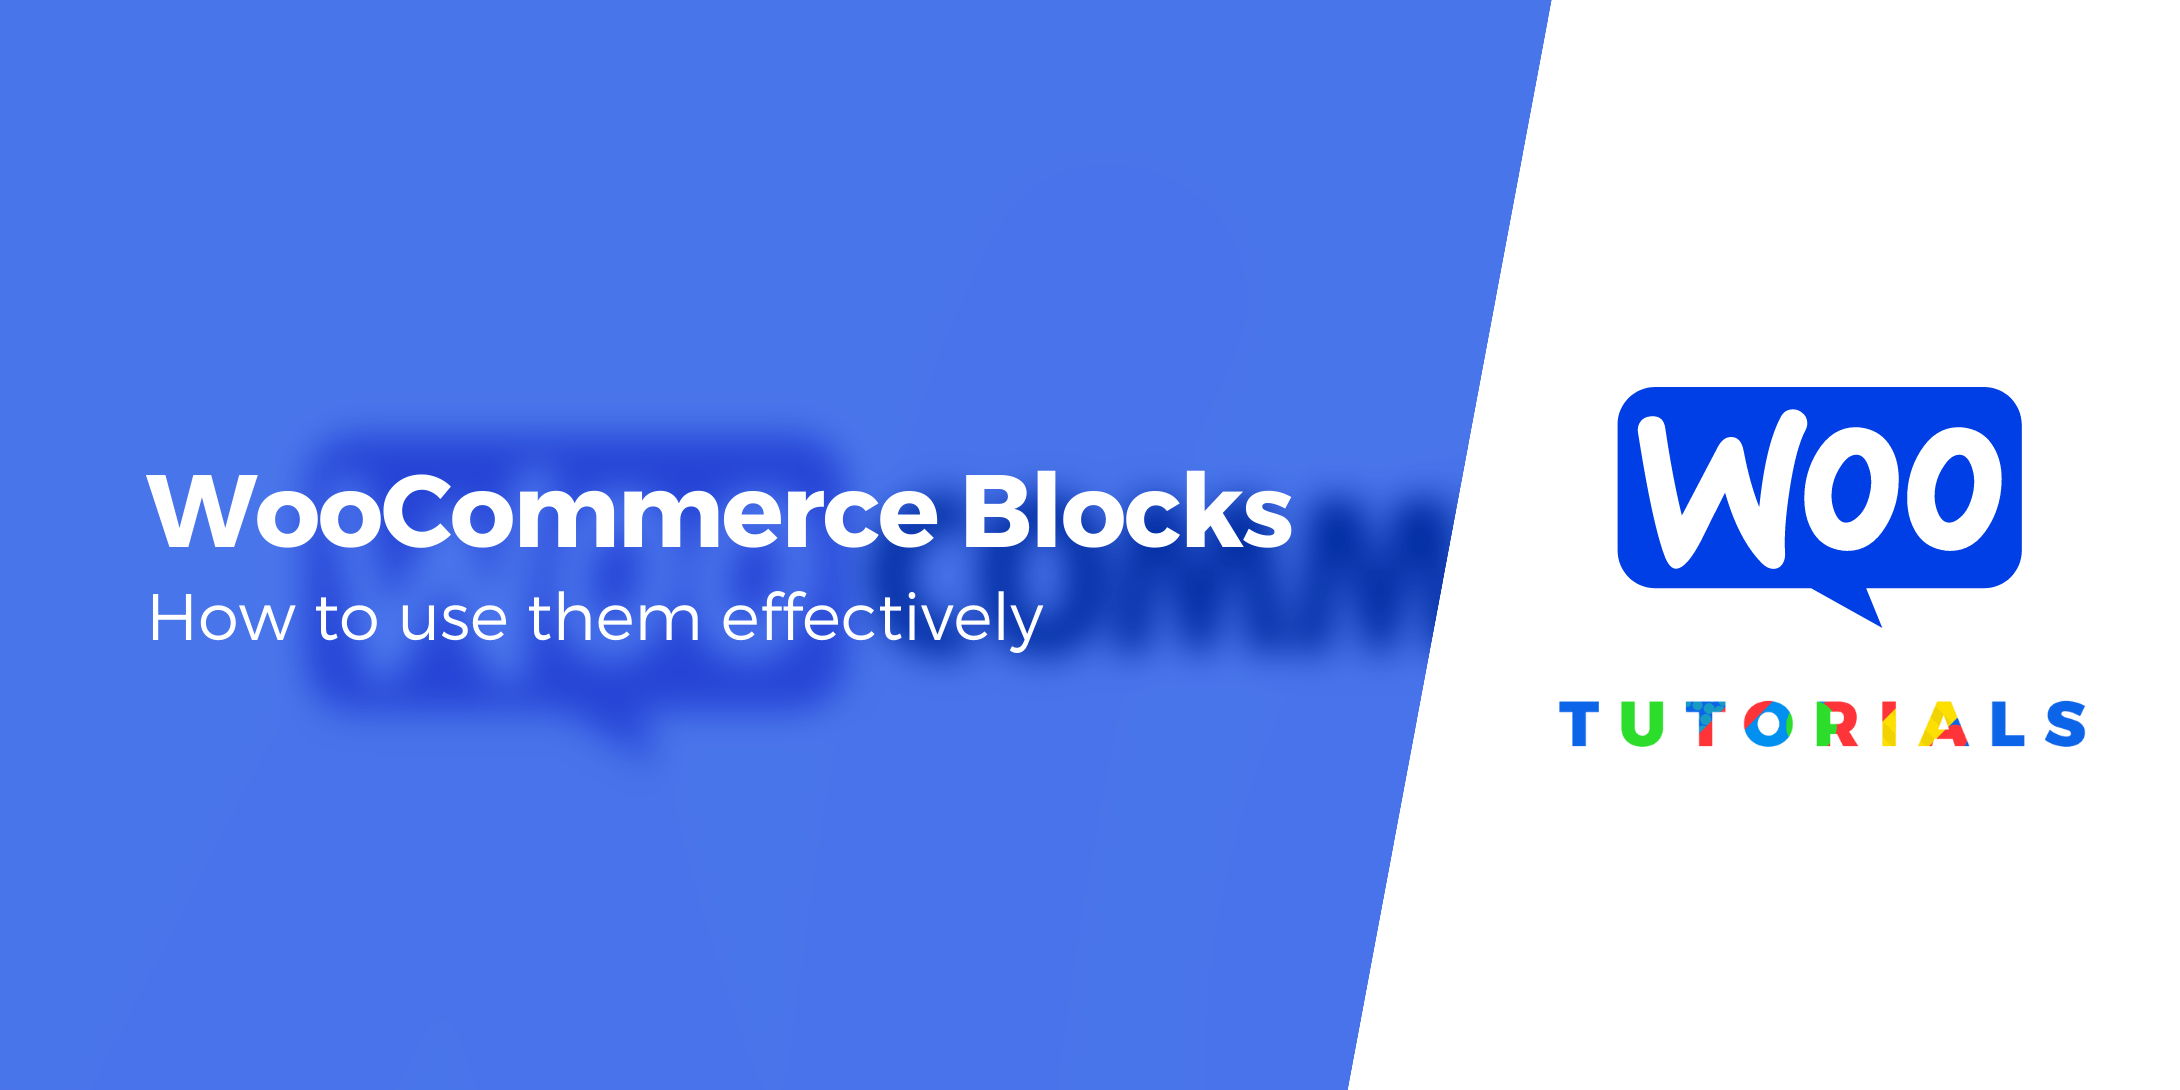 WooCommerce Blocks: What are They and How to Use Them Effectively